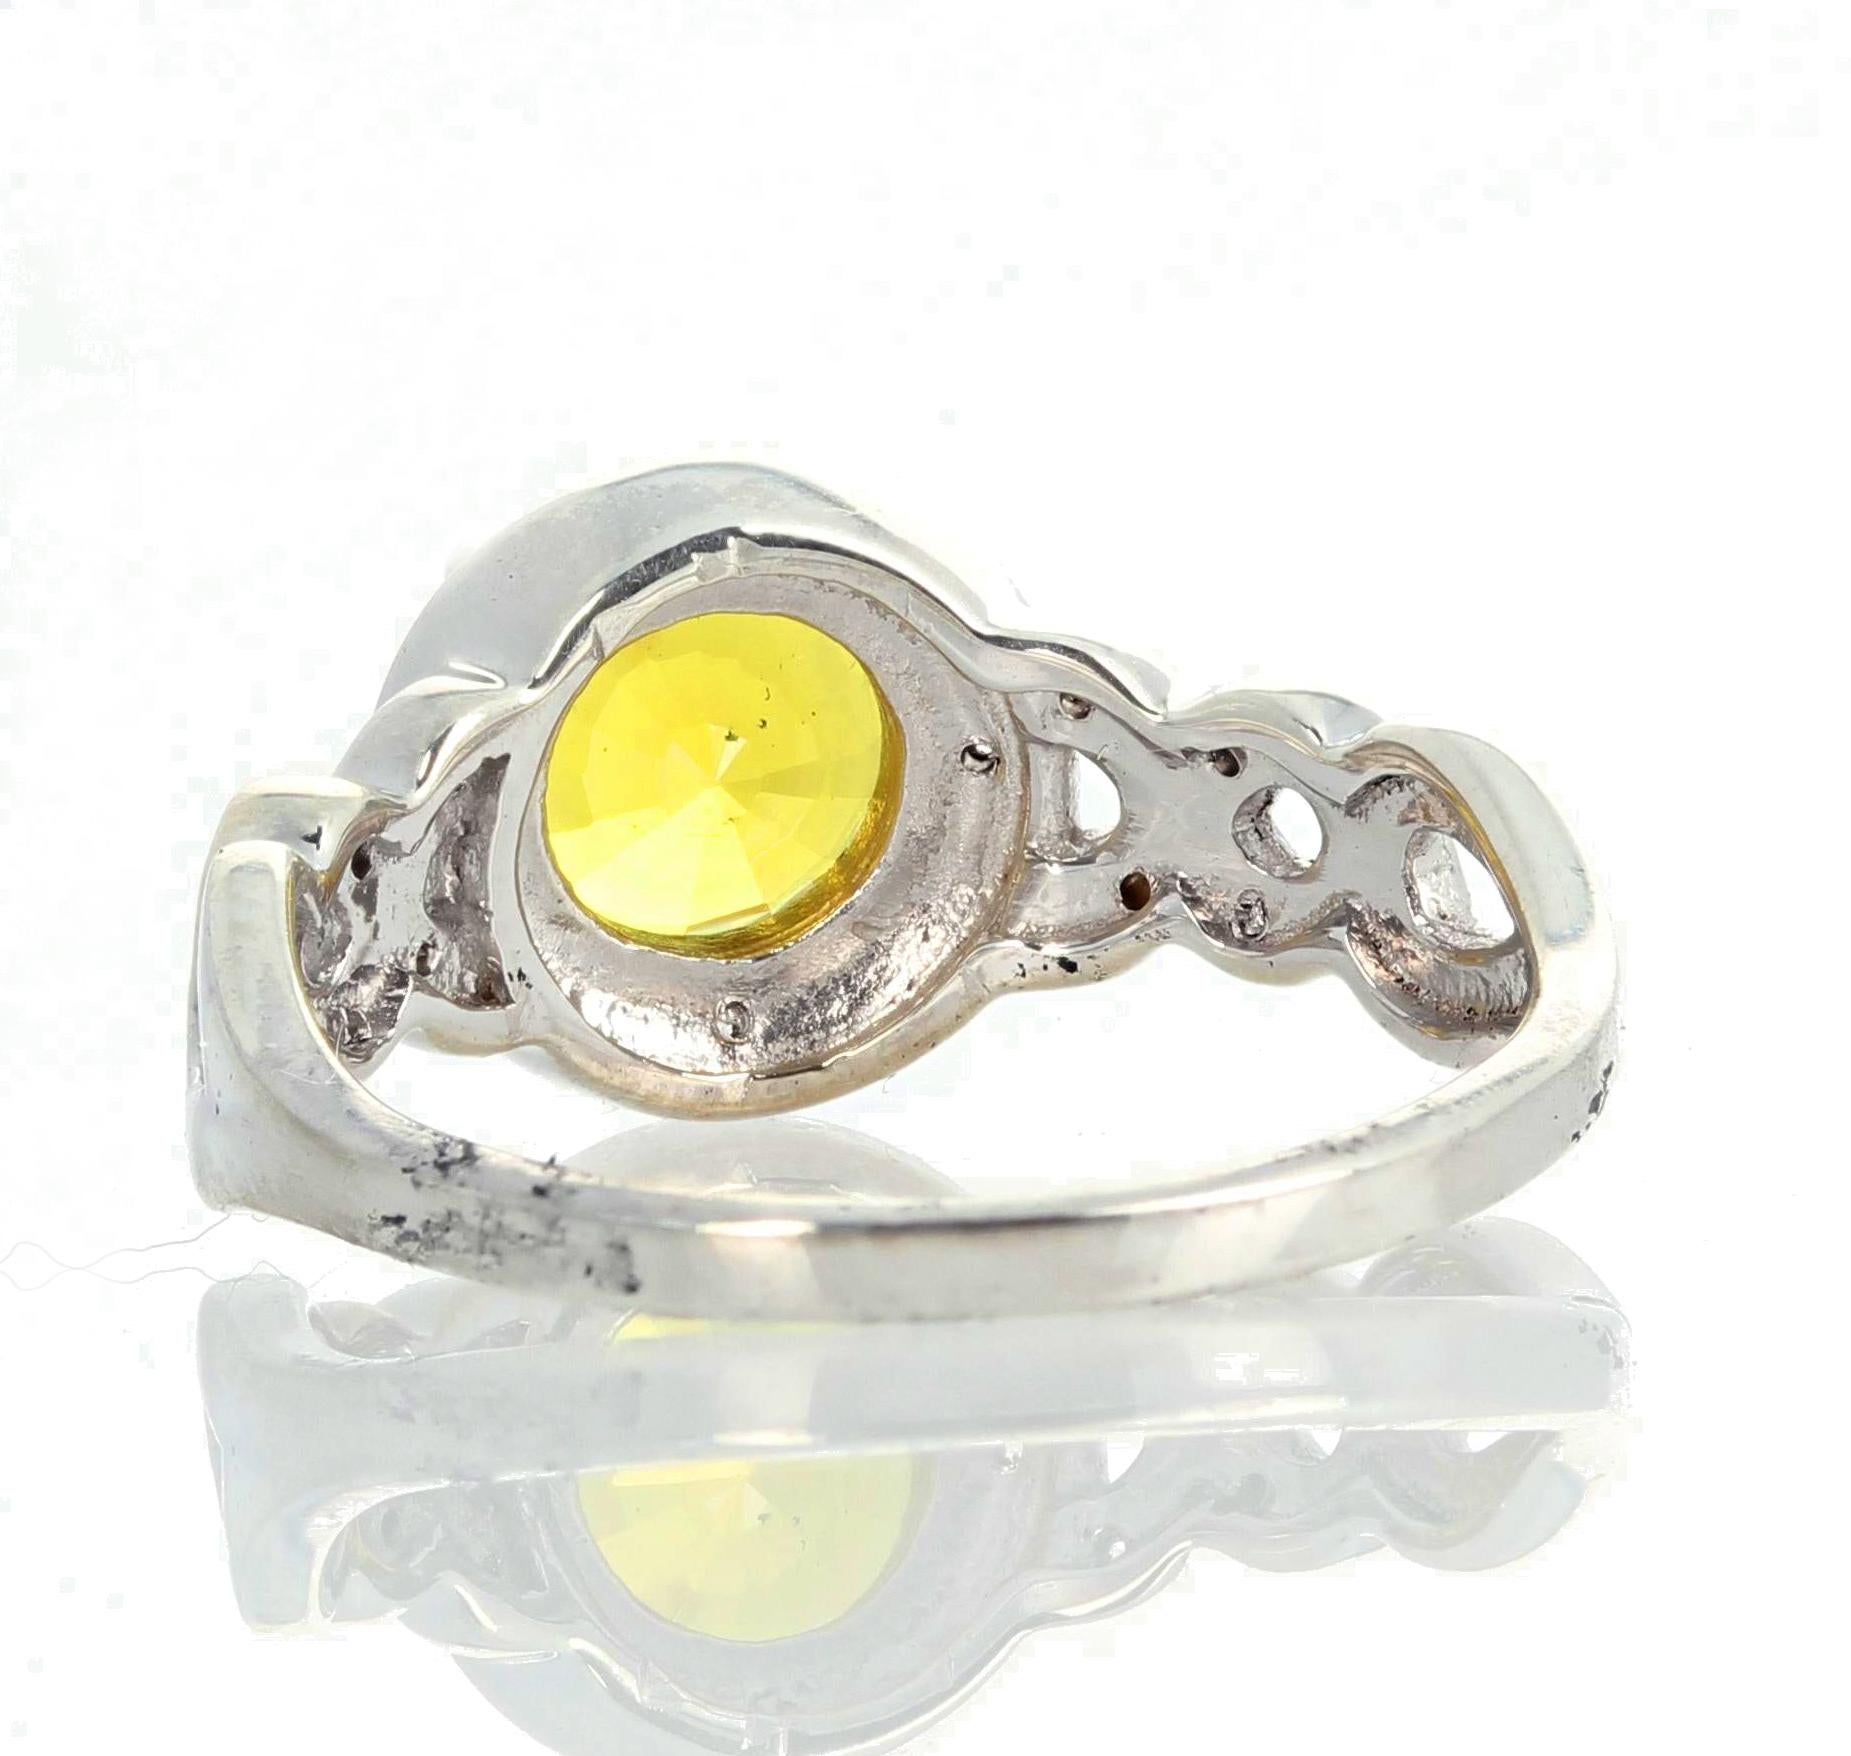 AJD Brilliantly Sparkling 1.3 Ct Canary Yellow Spinel & Diamonds Ring In New Condition For Sale In Raleigh, NC